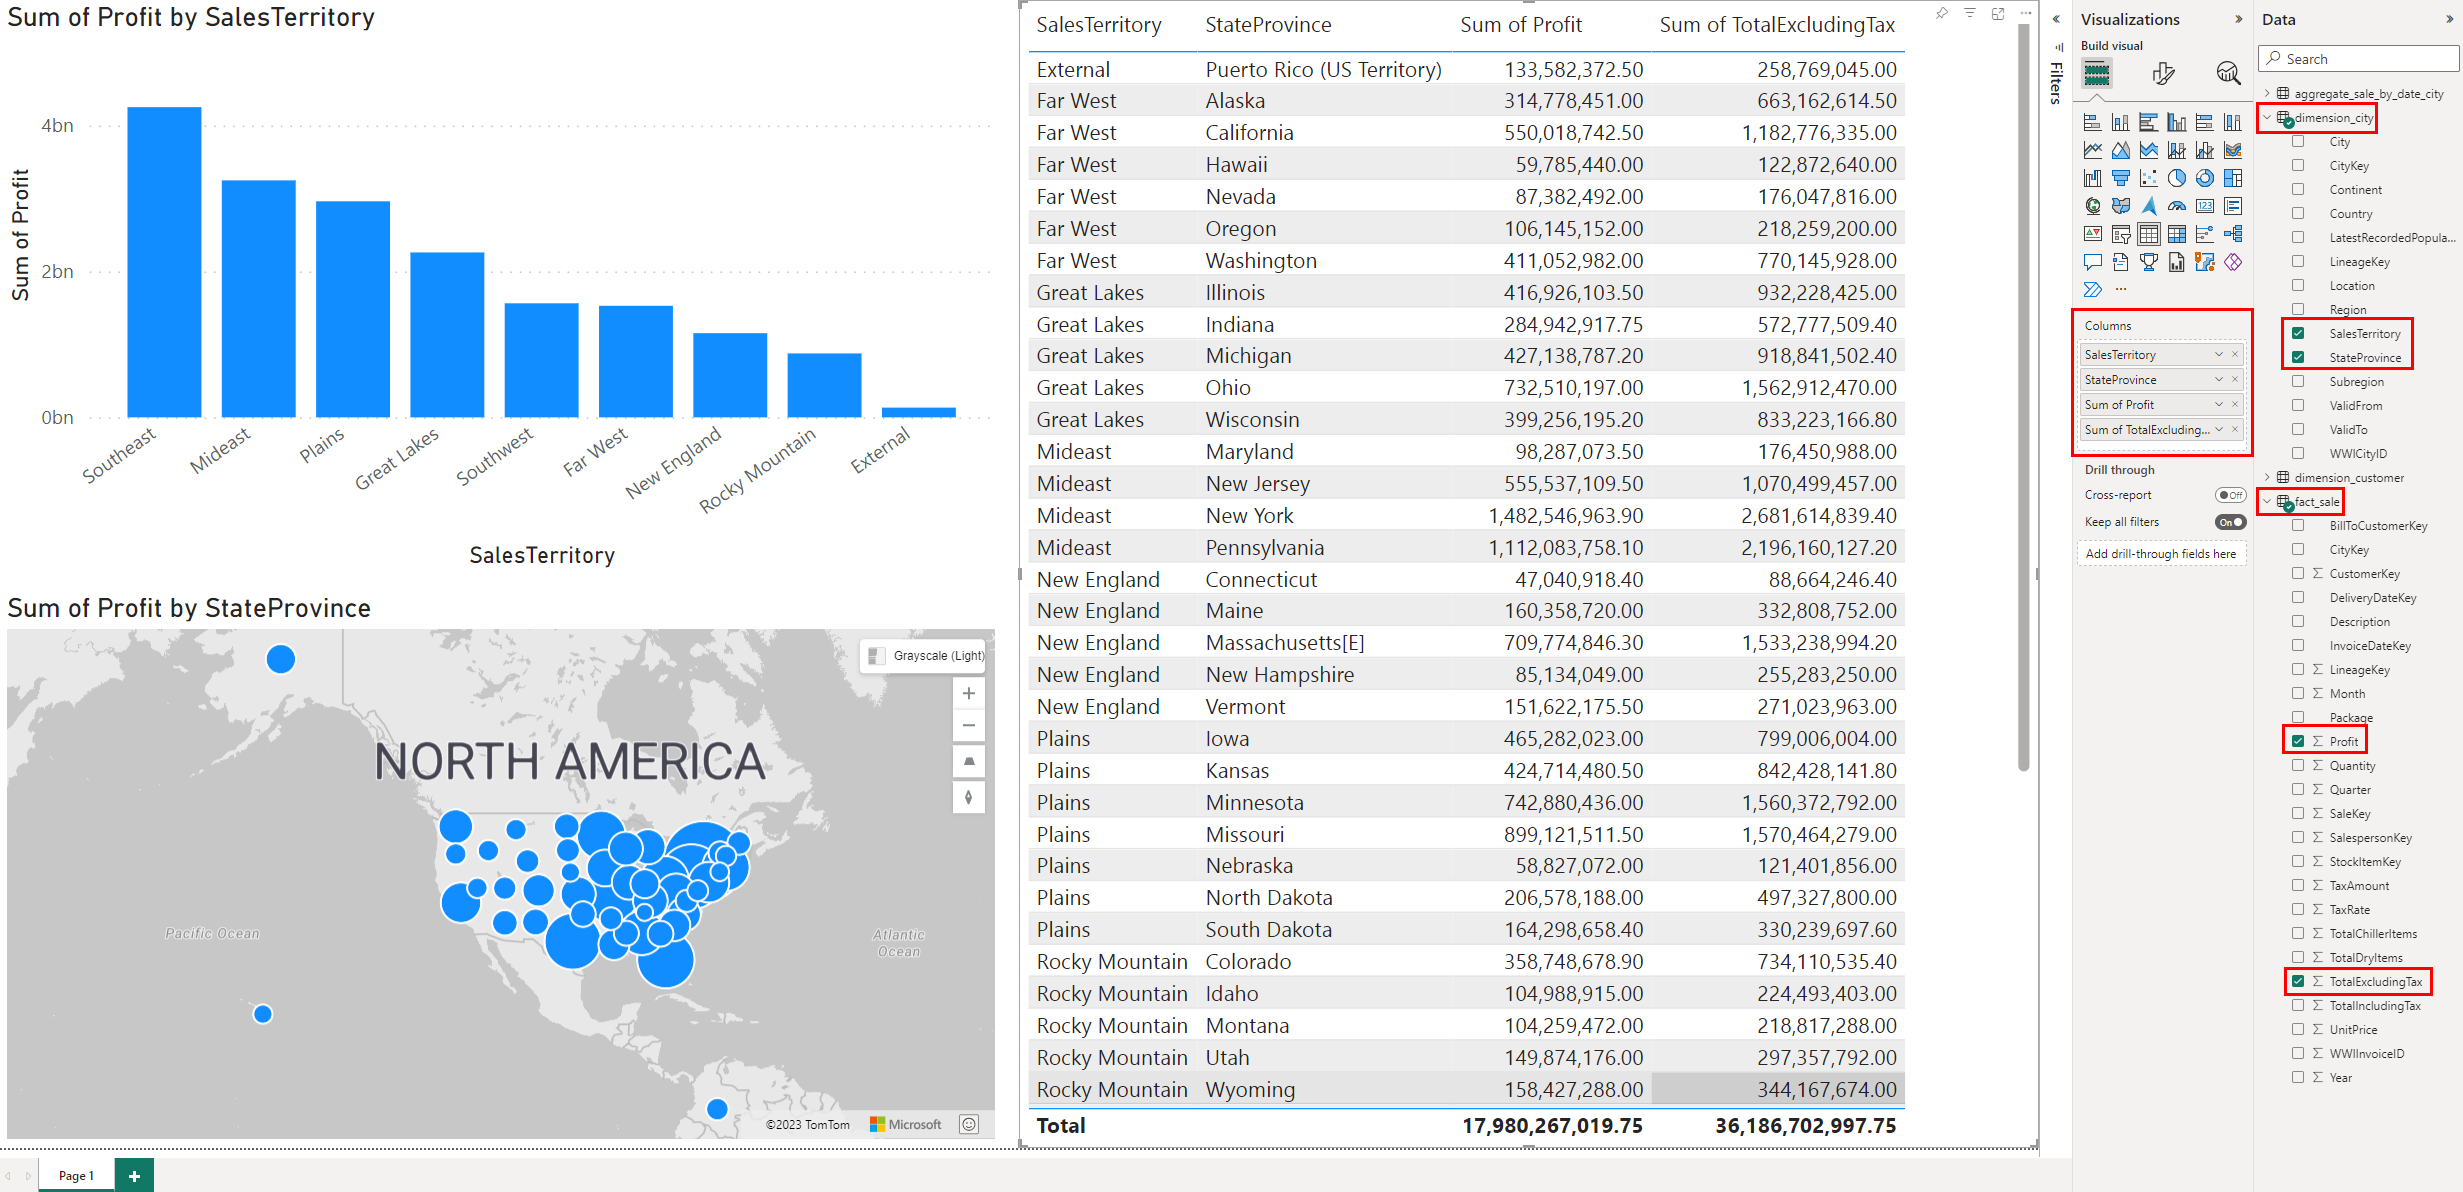 Screenshot of the canvas next to the Visualization and Data panes, which show where to select the specified details. The canvas contains a bar chart, a map plot, and a table.